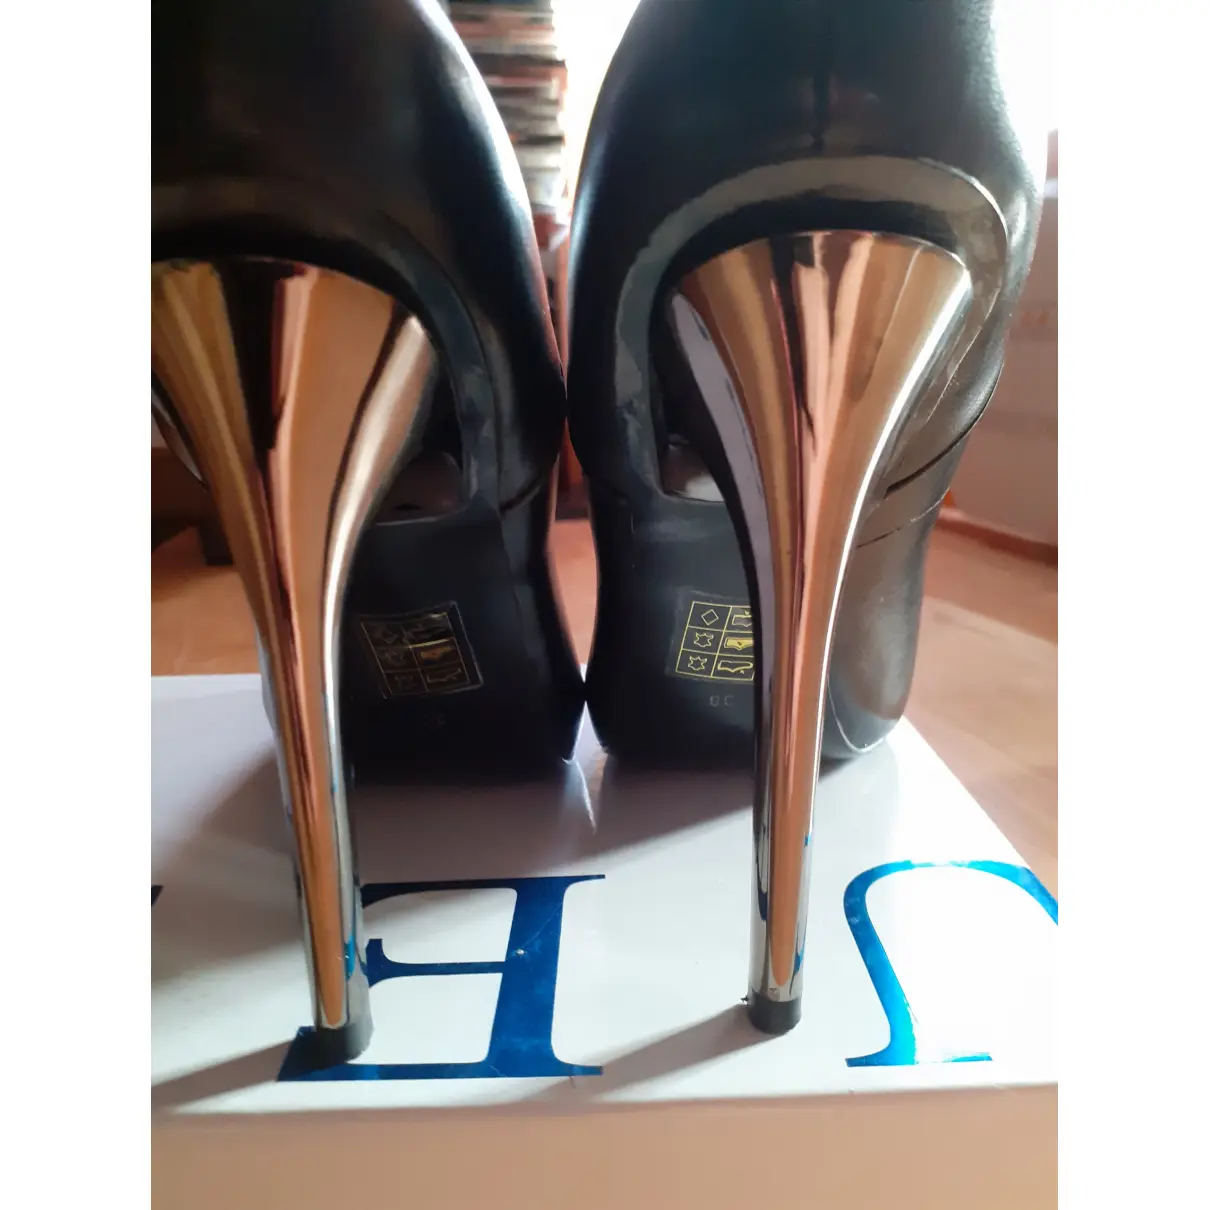 Leather heels GUESS